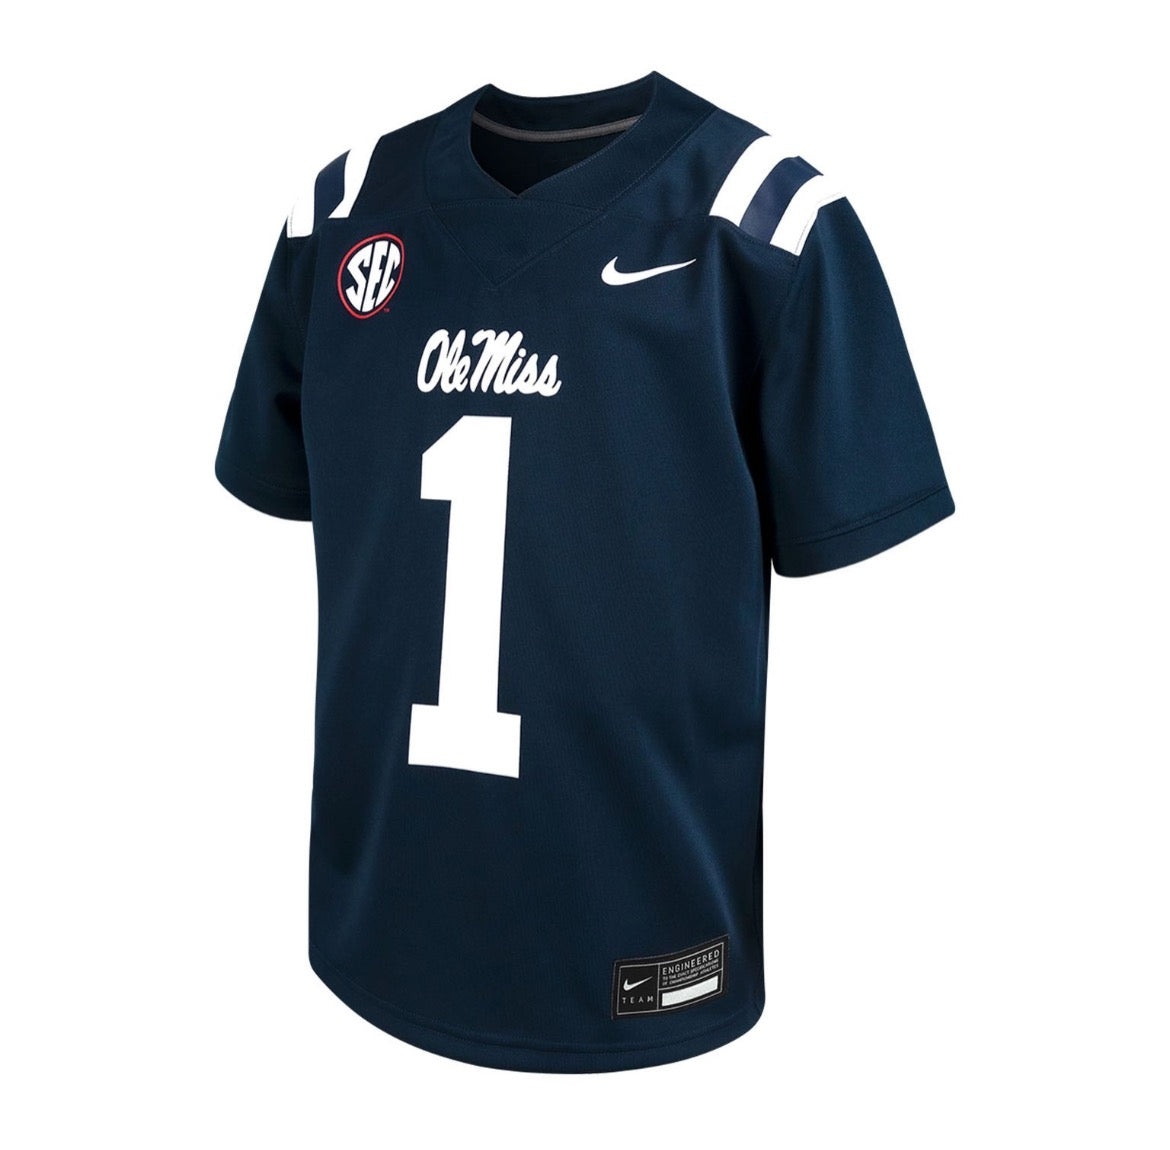 Nike Youth Ole Miss Rebels White Replica #1 Football Jersey, Boys', XL